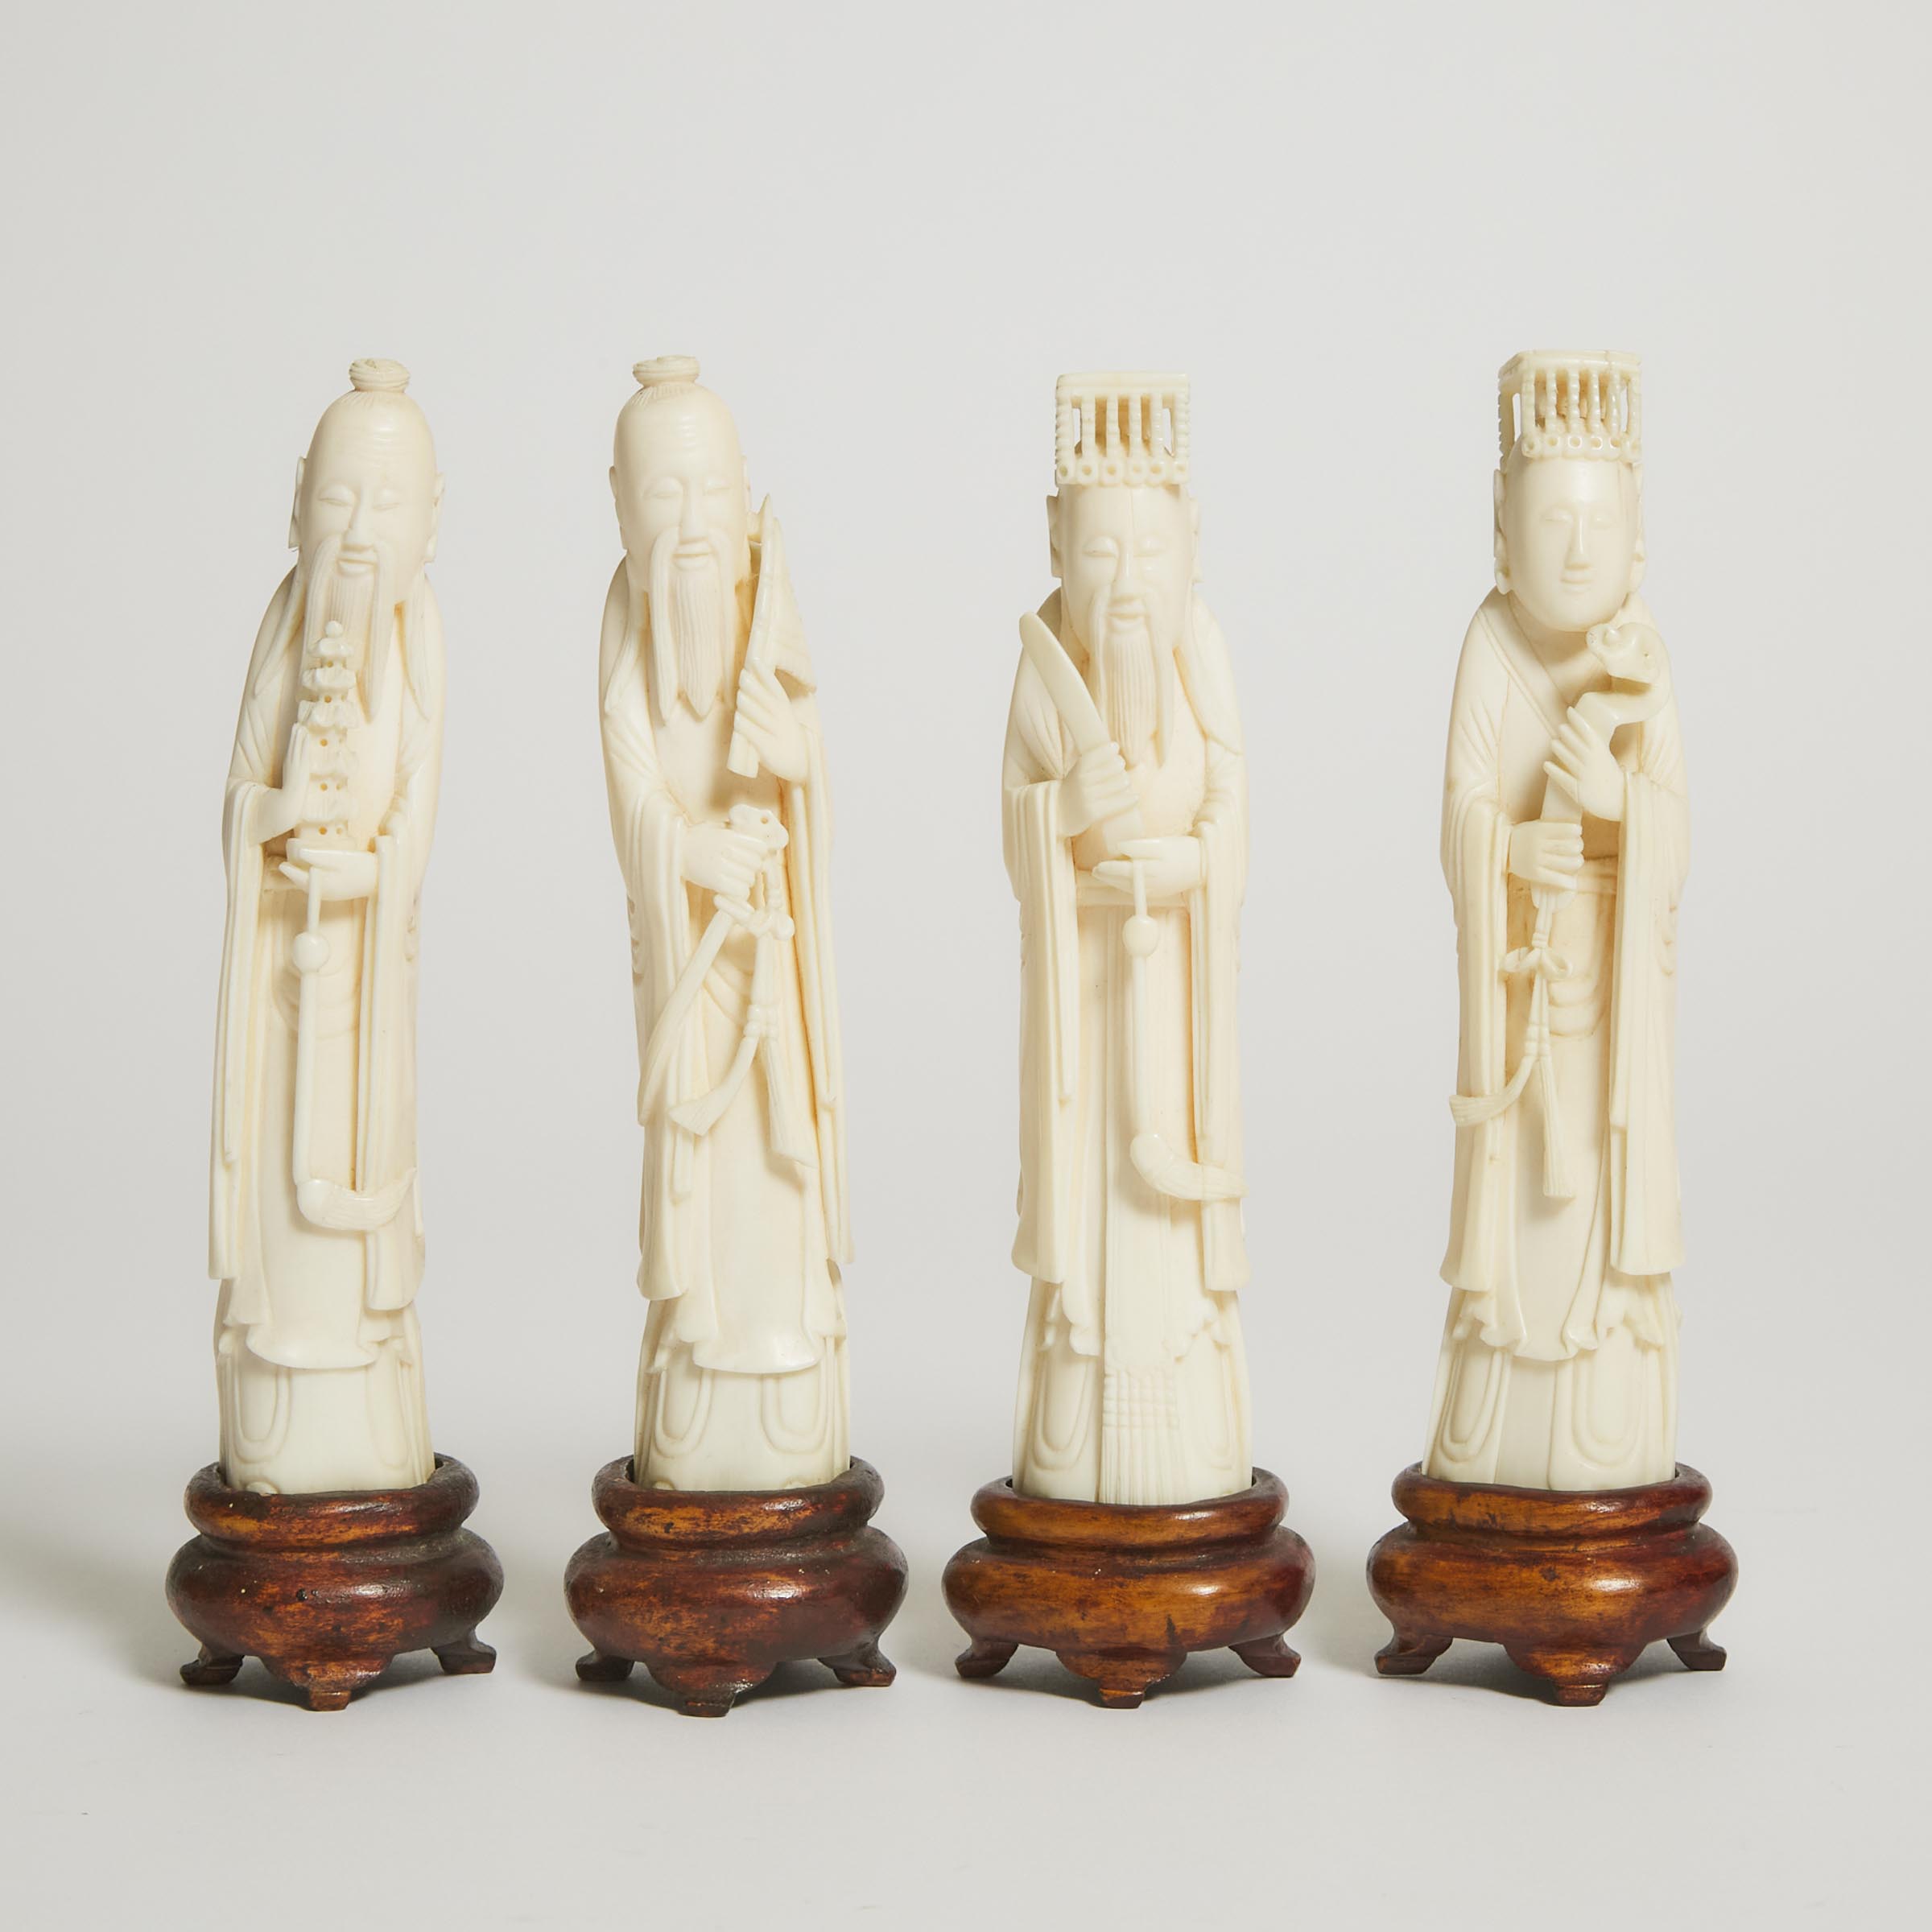 A Group of Four Ivory Figures of